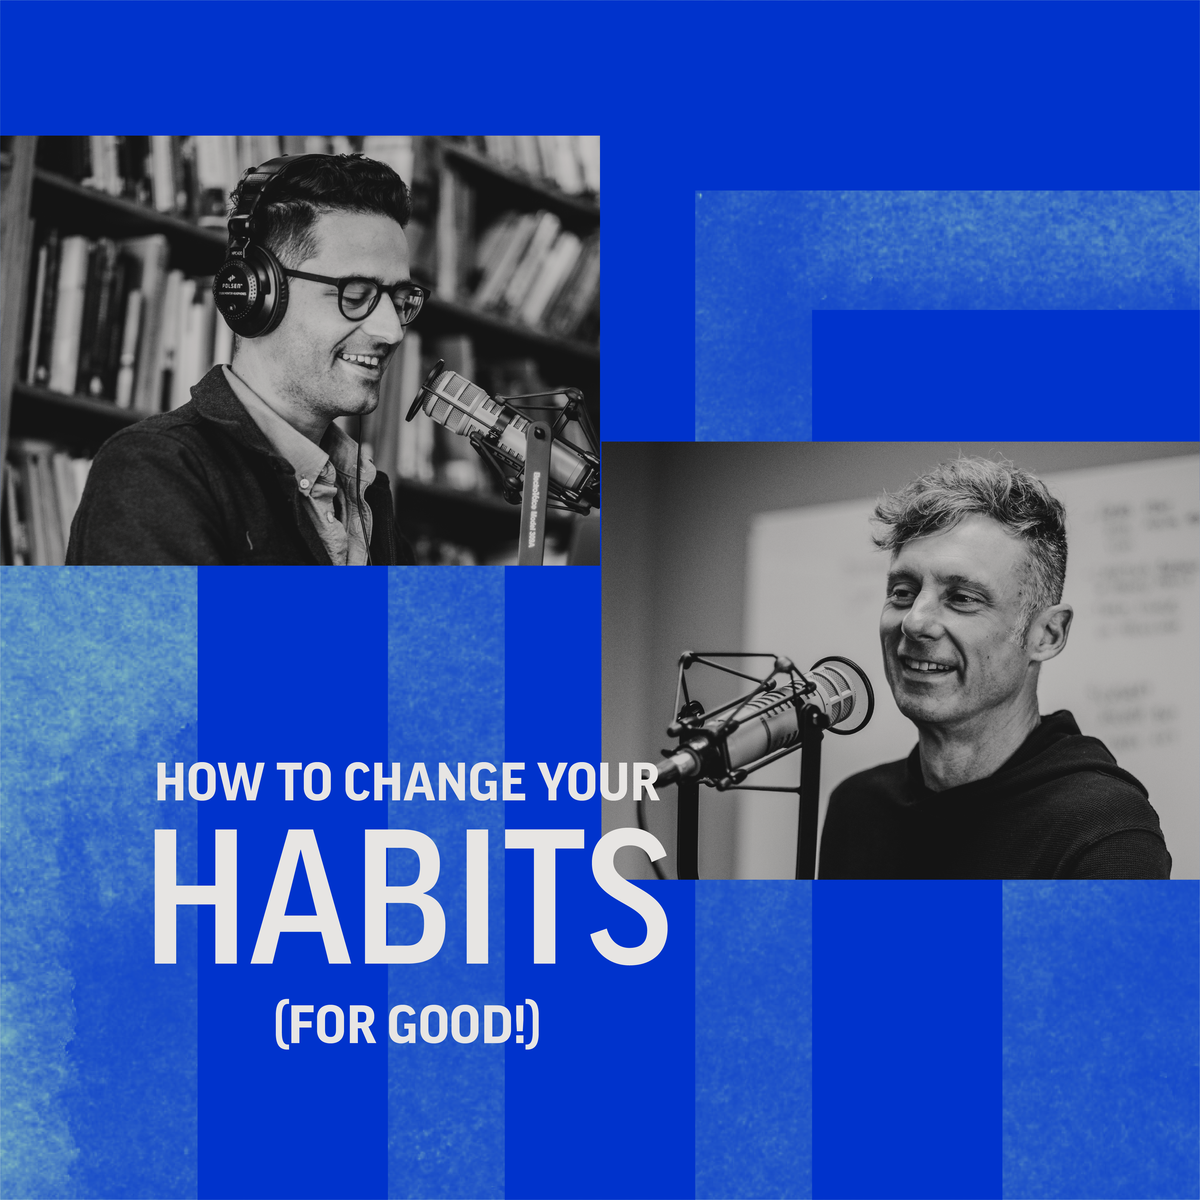 How To Change Your Habits (For Good!)